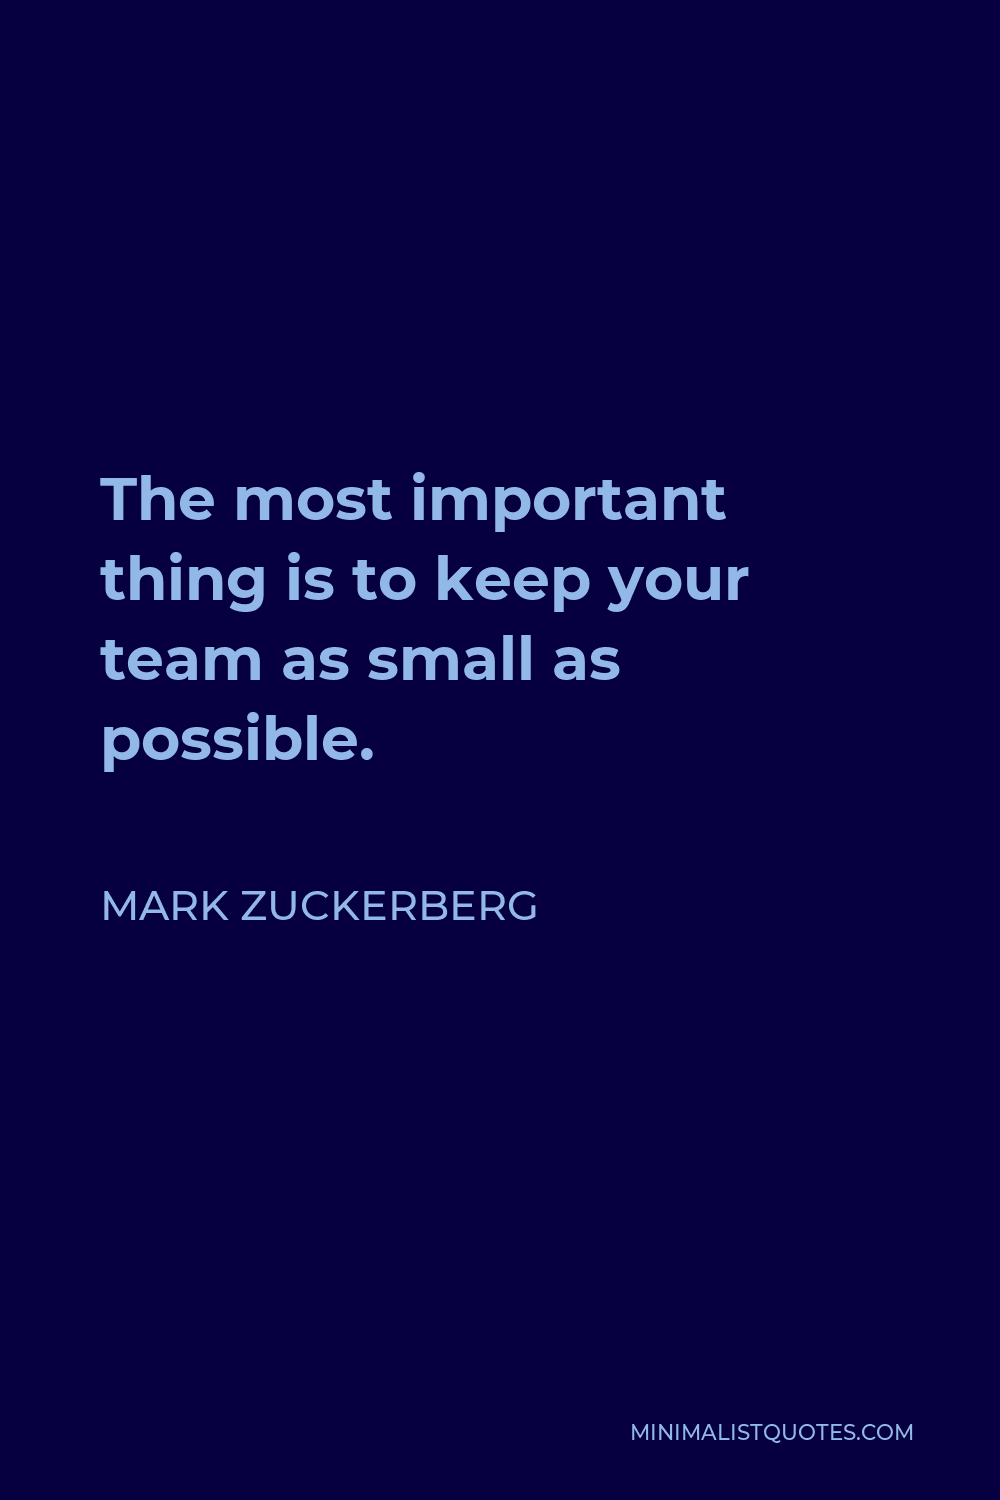 Mark Zuckerberg Quote - The most important thing is to keep your team as small as possible.